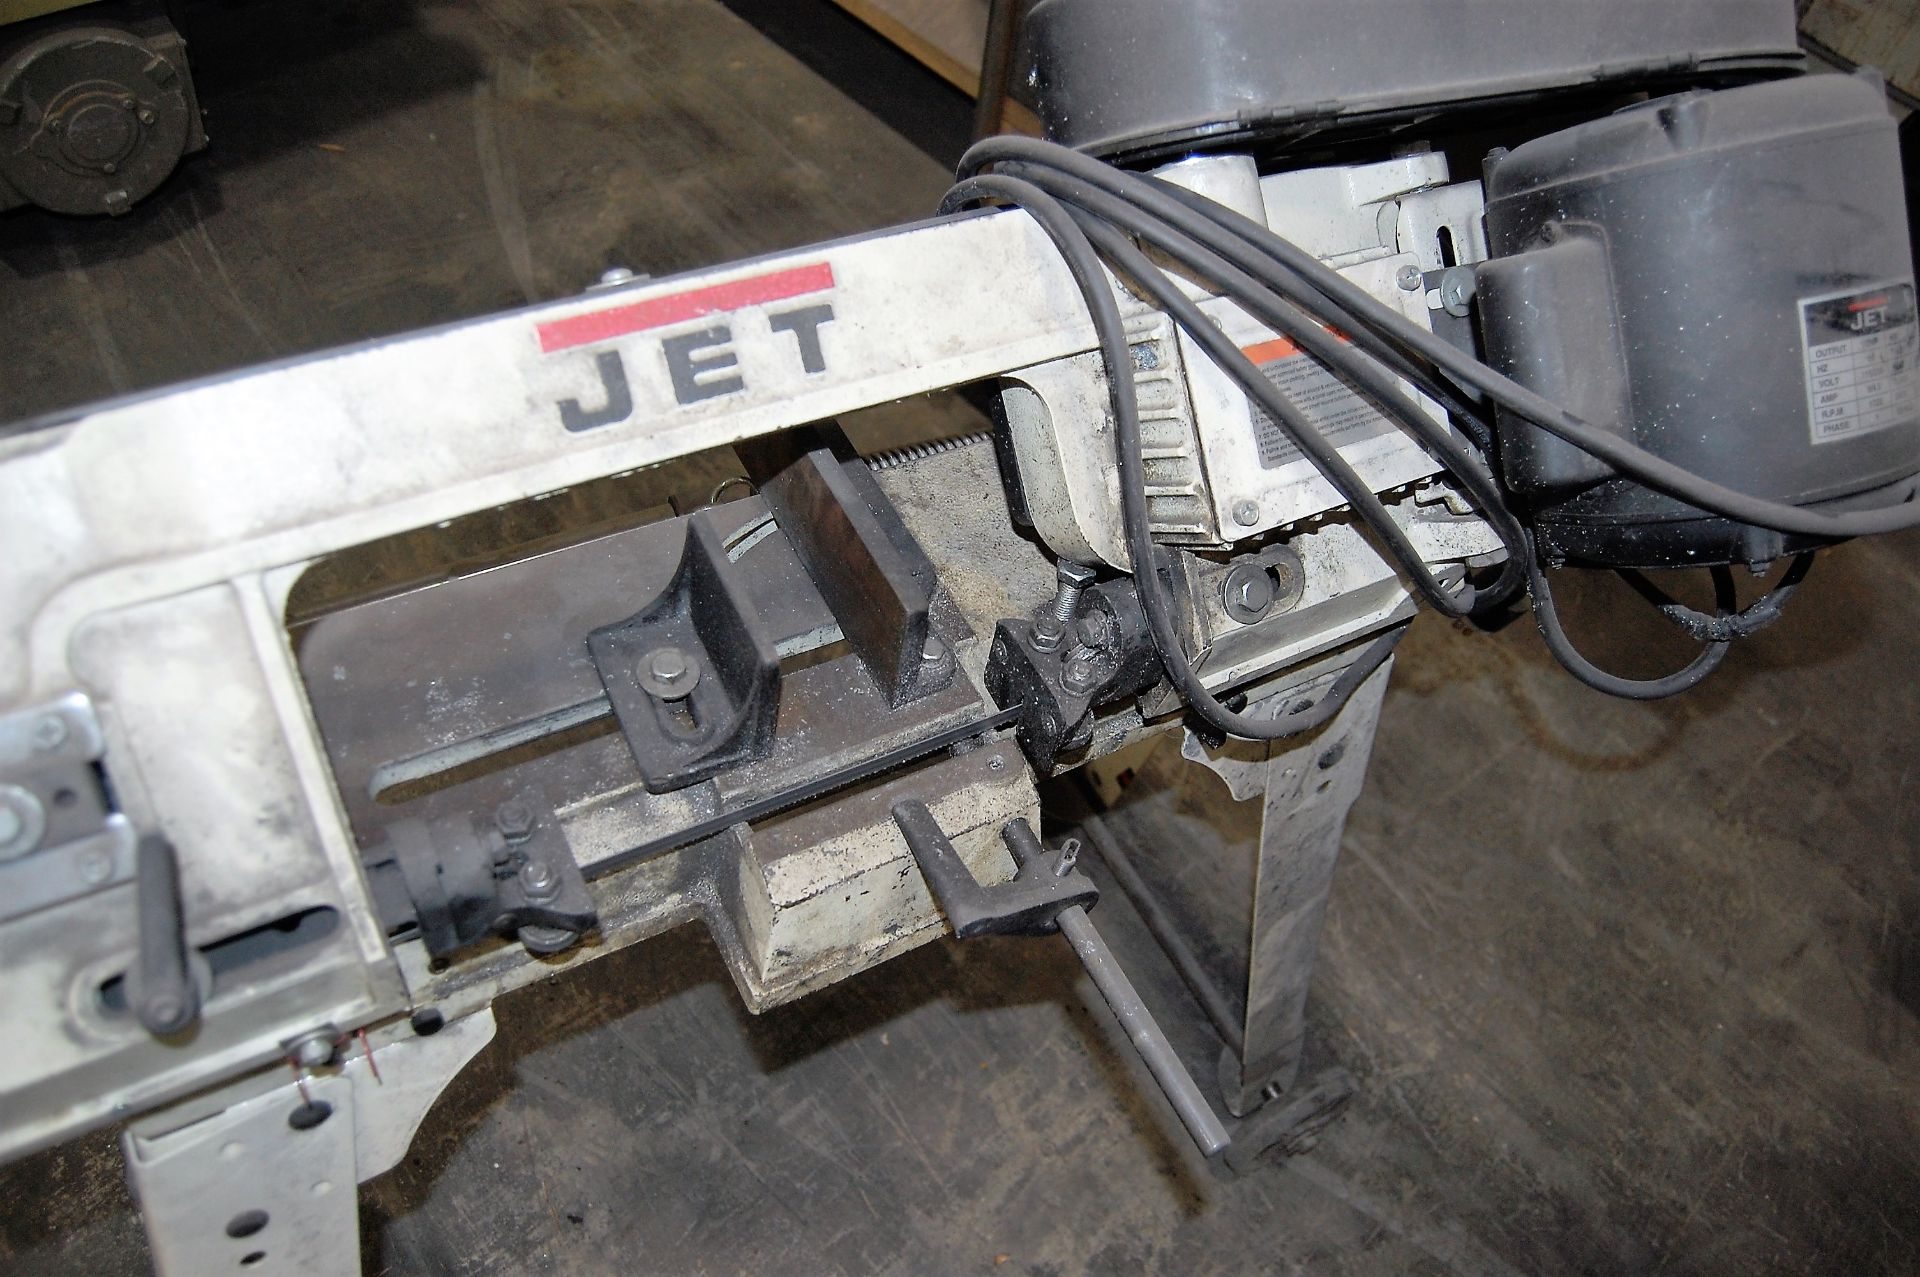 5" X 7" JET MDL. 414458 HORIZONTAL / VERTICAL BANDSAW, 1/2HP, SINGLE PHASE, S/N: 070425866 [ - Image 2 of 4